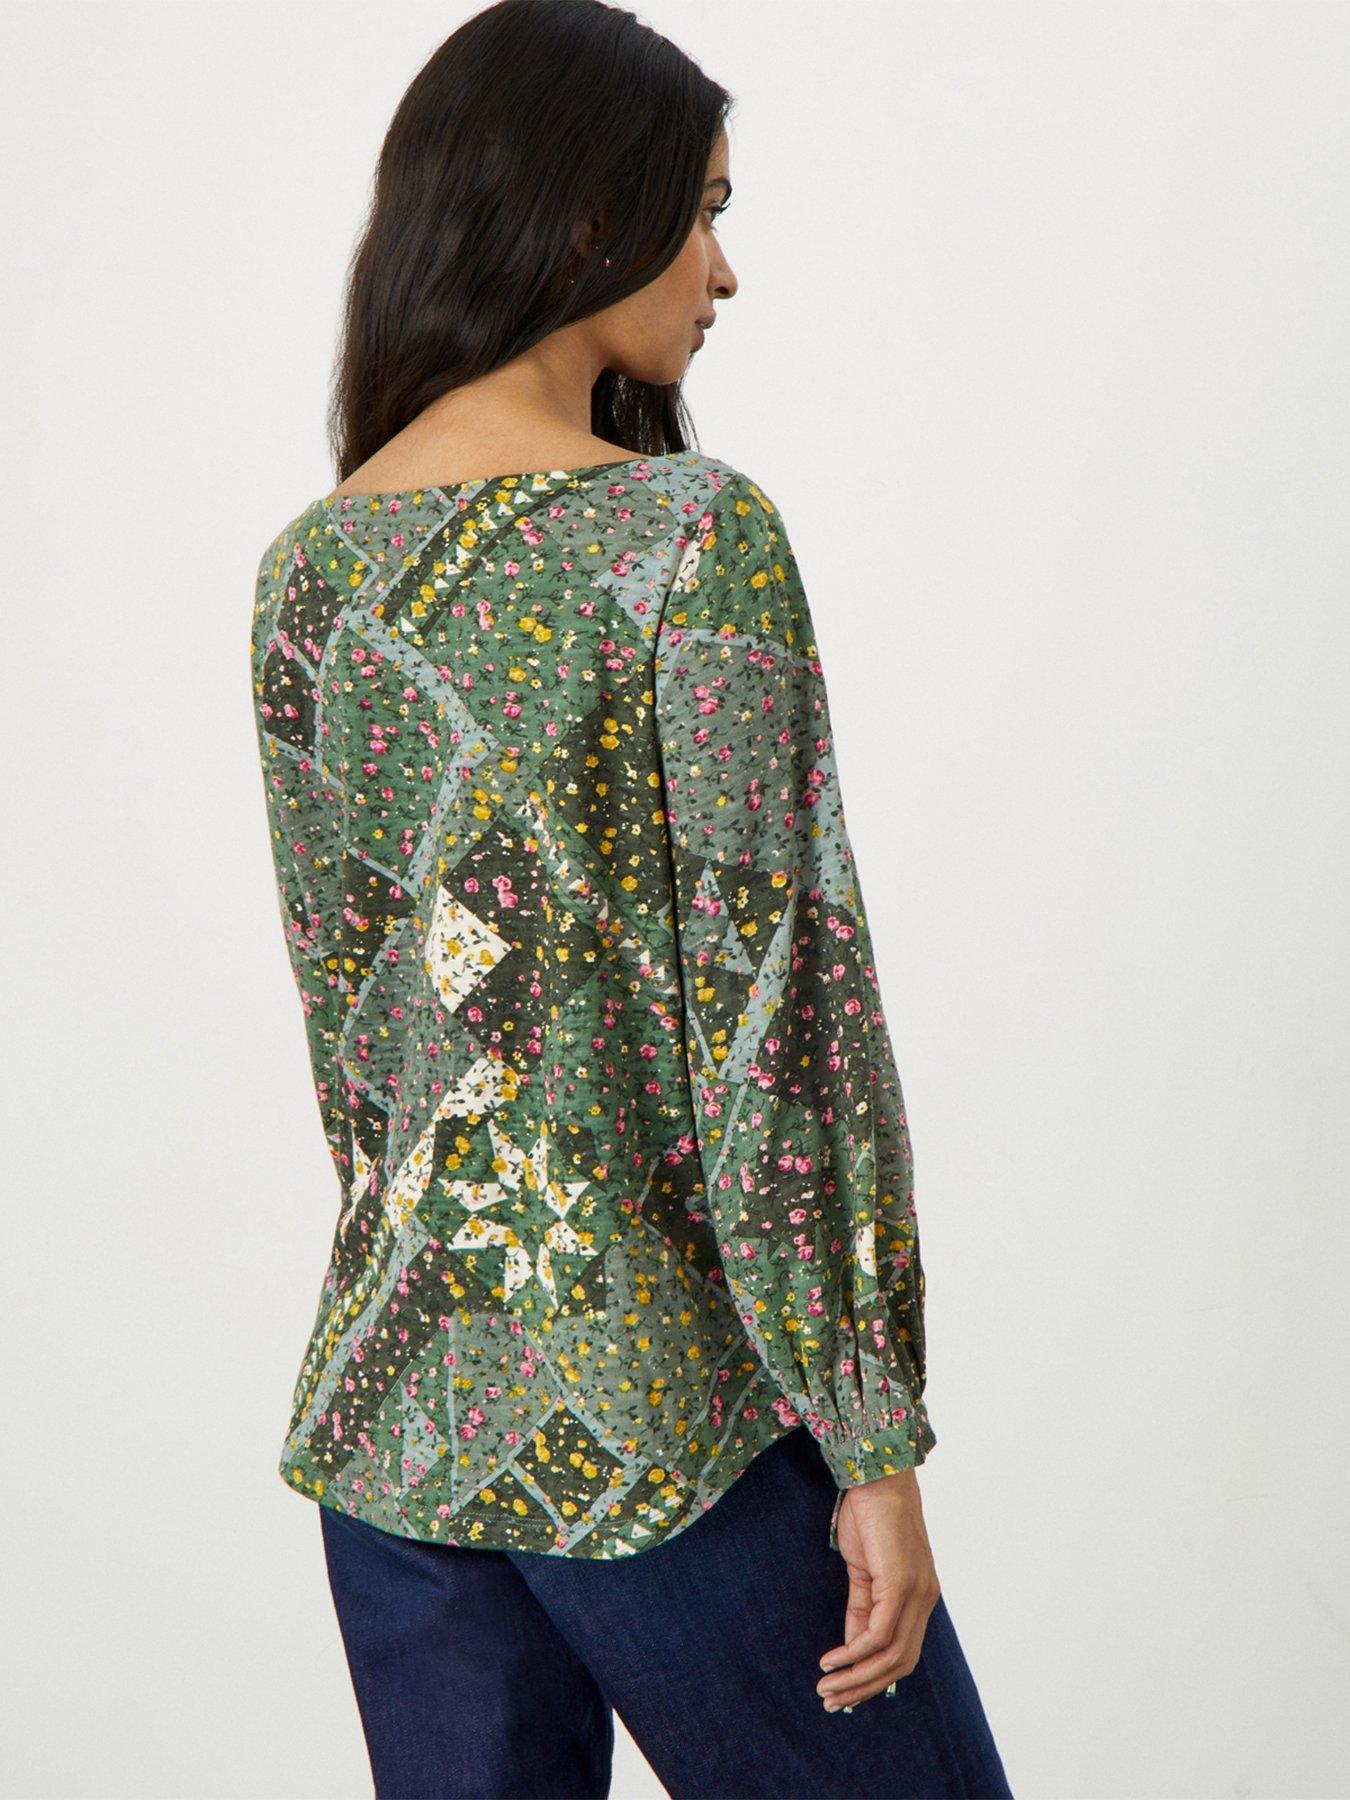  Patch Print Long Sleeve Jersey Top - Green